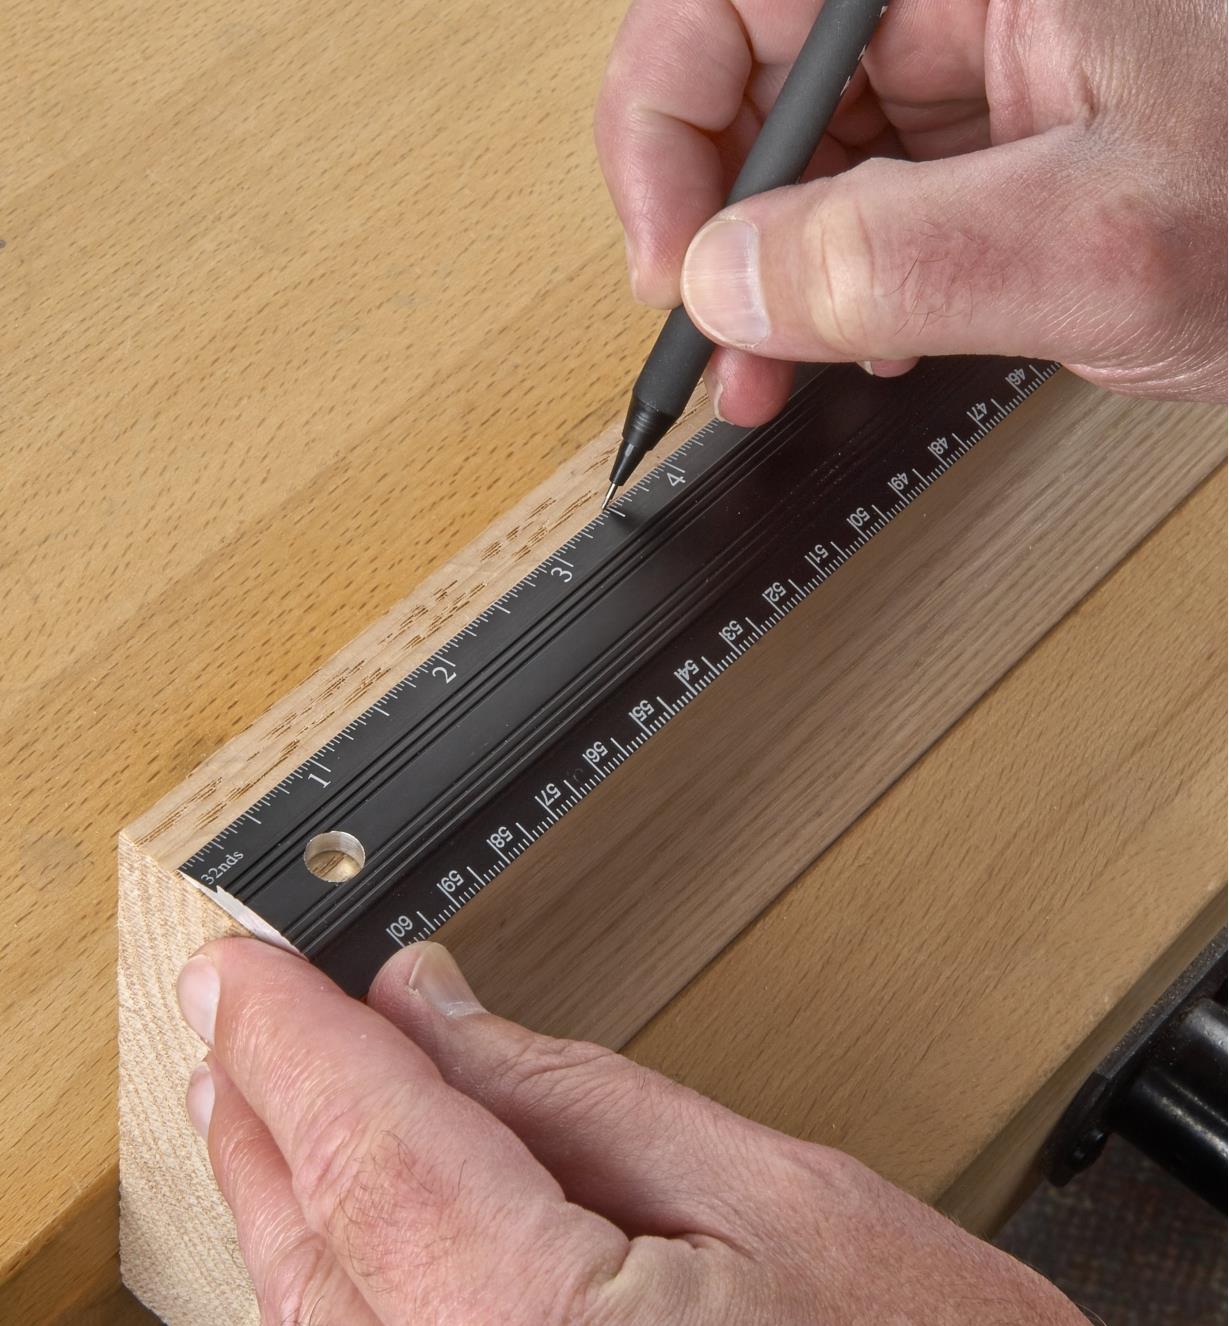 Using a pencil and a Veritas bench rule to mark a cut line on a wooden workpiece